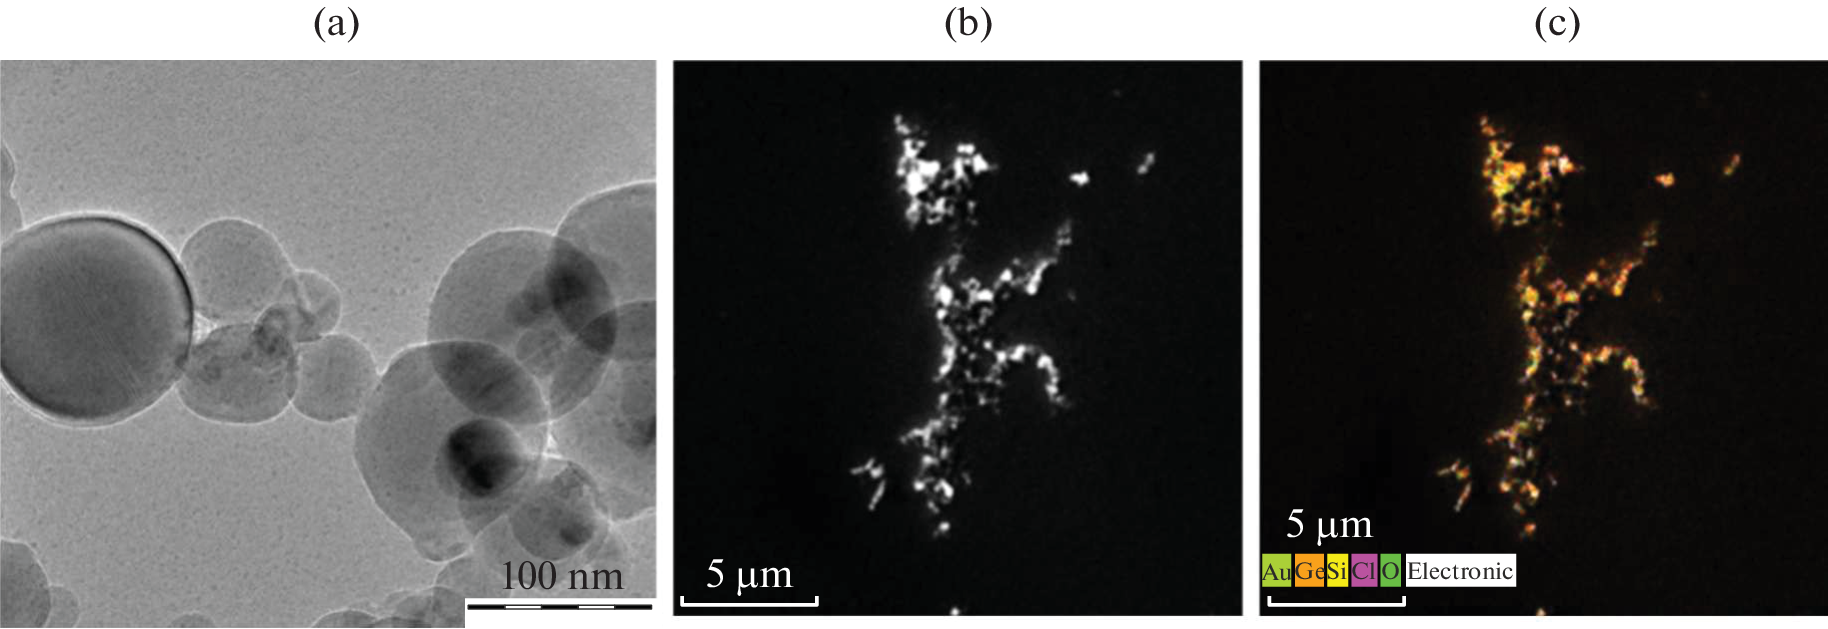 Optical Properties and Photo-Heating of Aqueous Suspensions of Silicon-Based Nanocomposite Particles with Deposited Gold